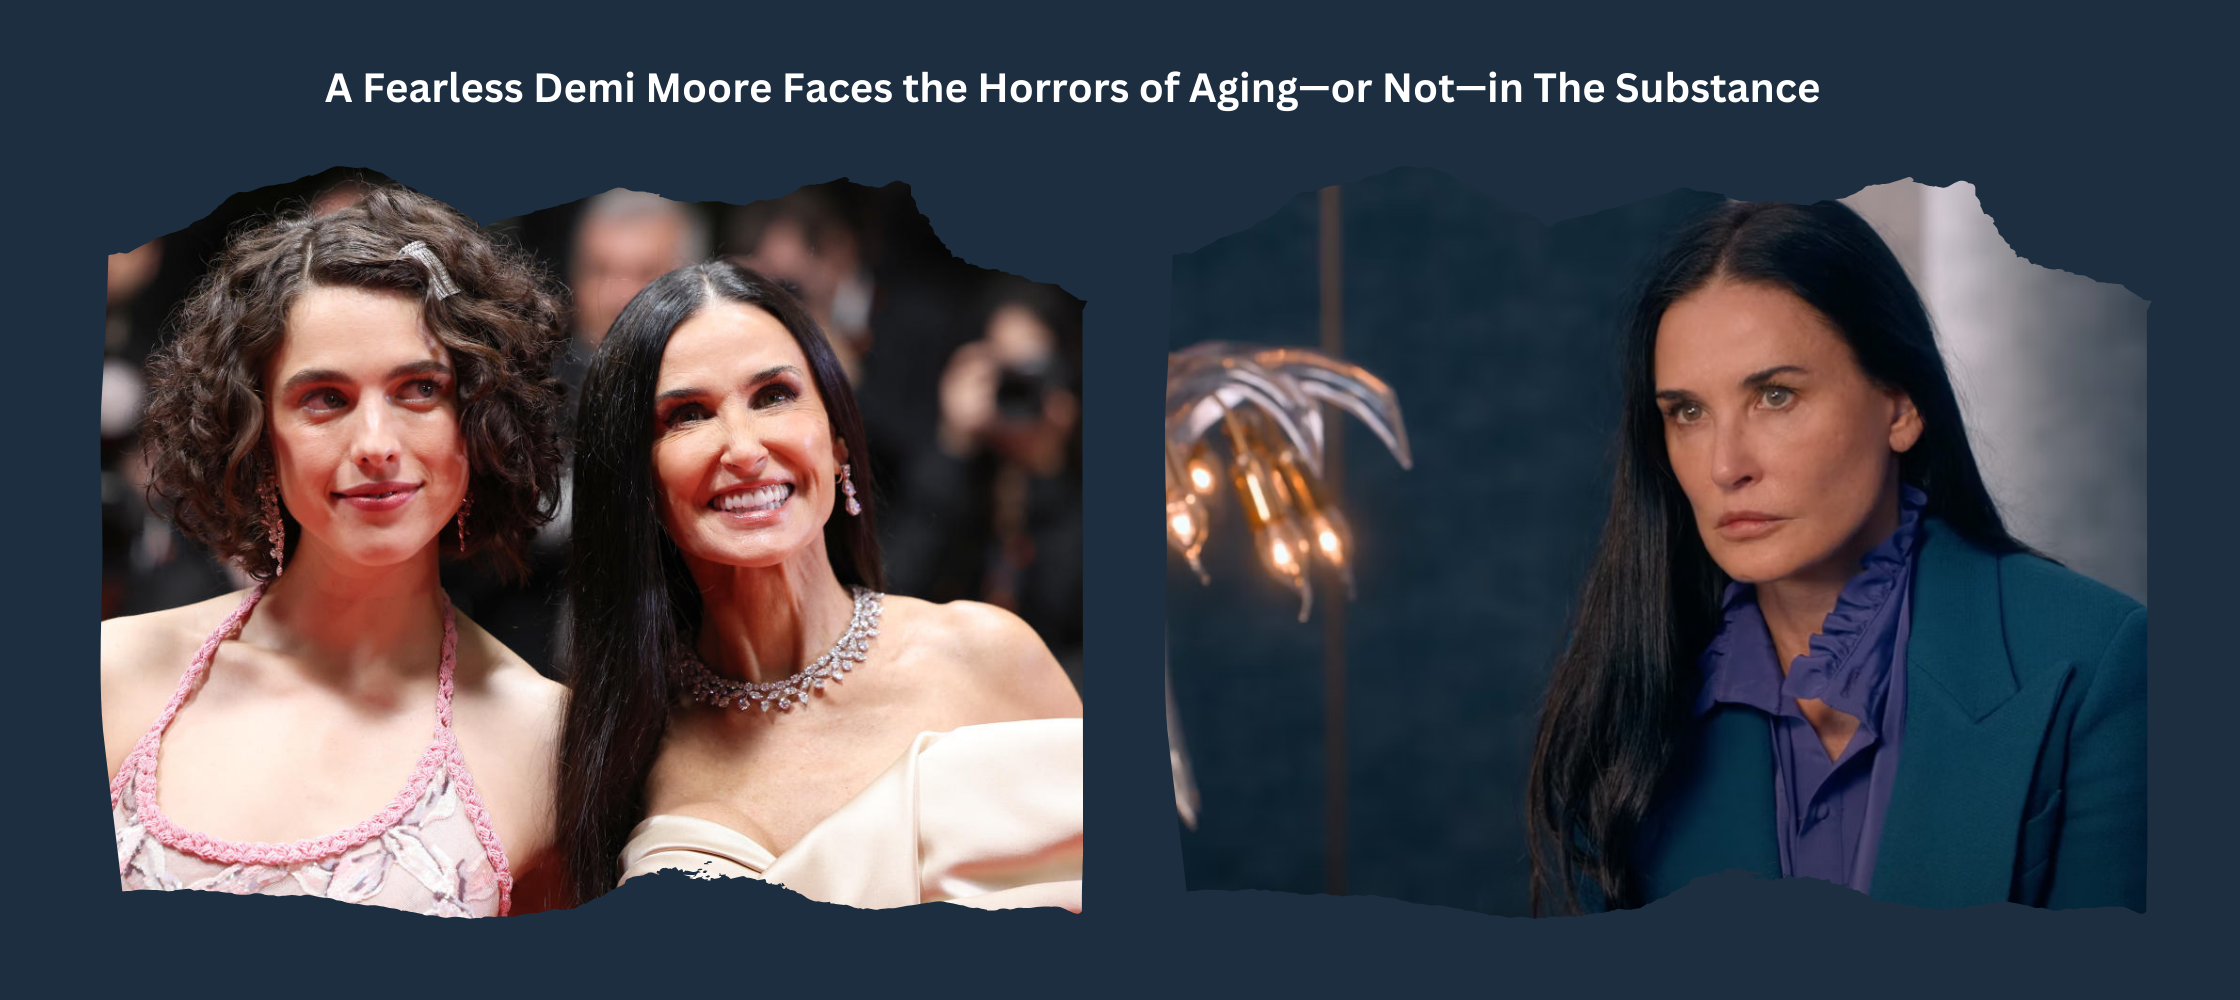 You are currently viewing A Fearless Demi Moore Faces the Horrors of Aging or Not in The Substance